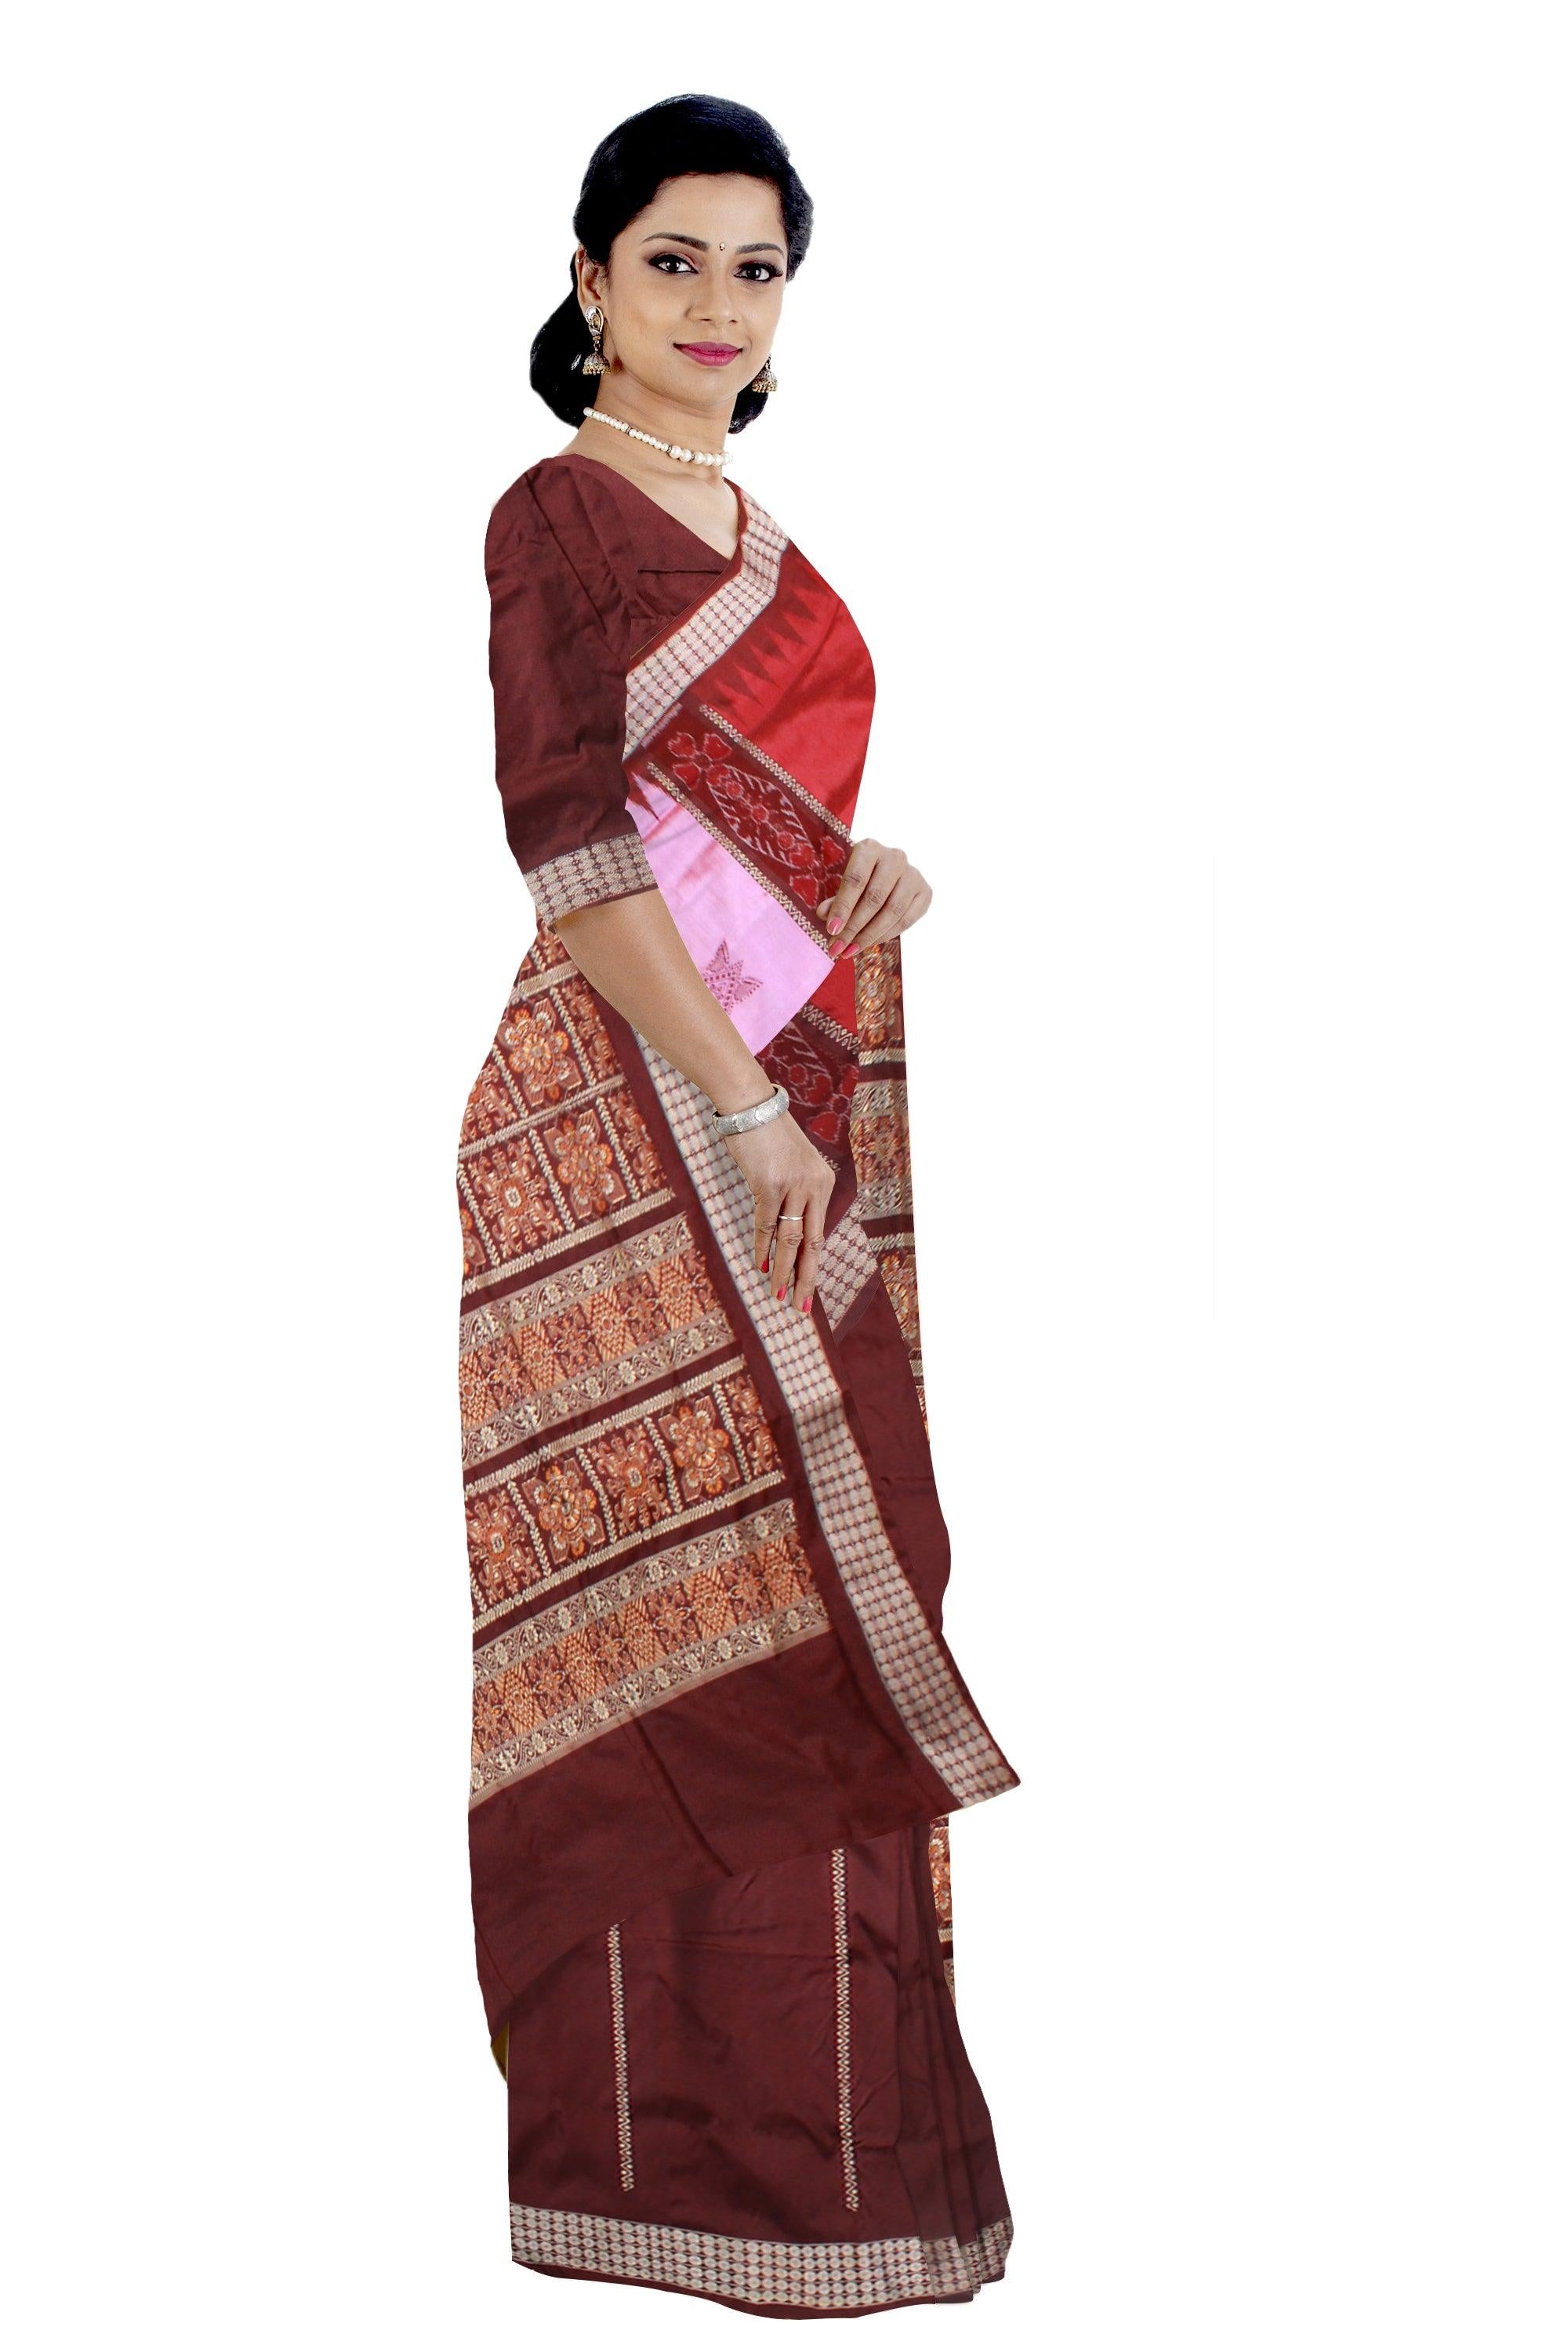 A PATLI PATA SAREE IN LIGHT PINK ,RED AND COFFEE COLOR BASE, WITH BLOUSE PIECE. - Koshali Arts & Crafts Enterprise